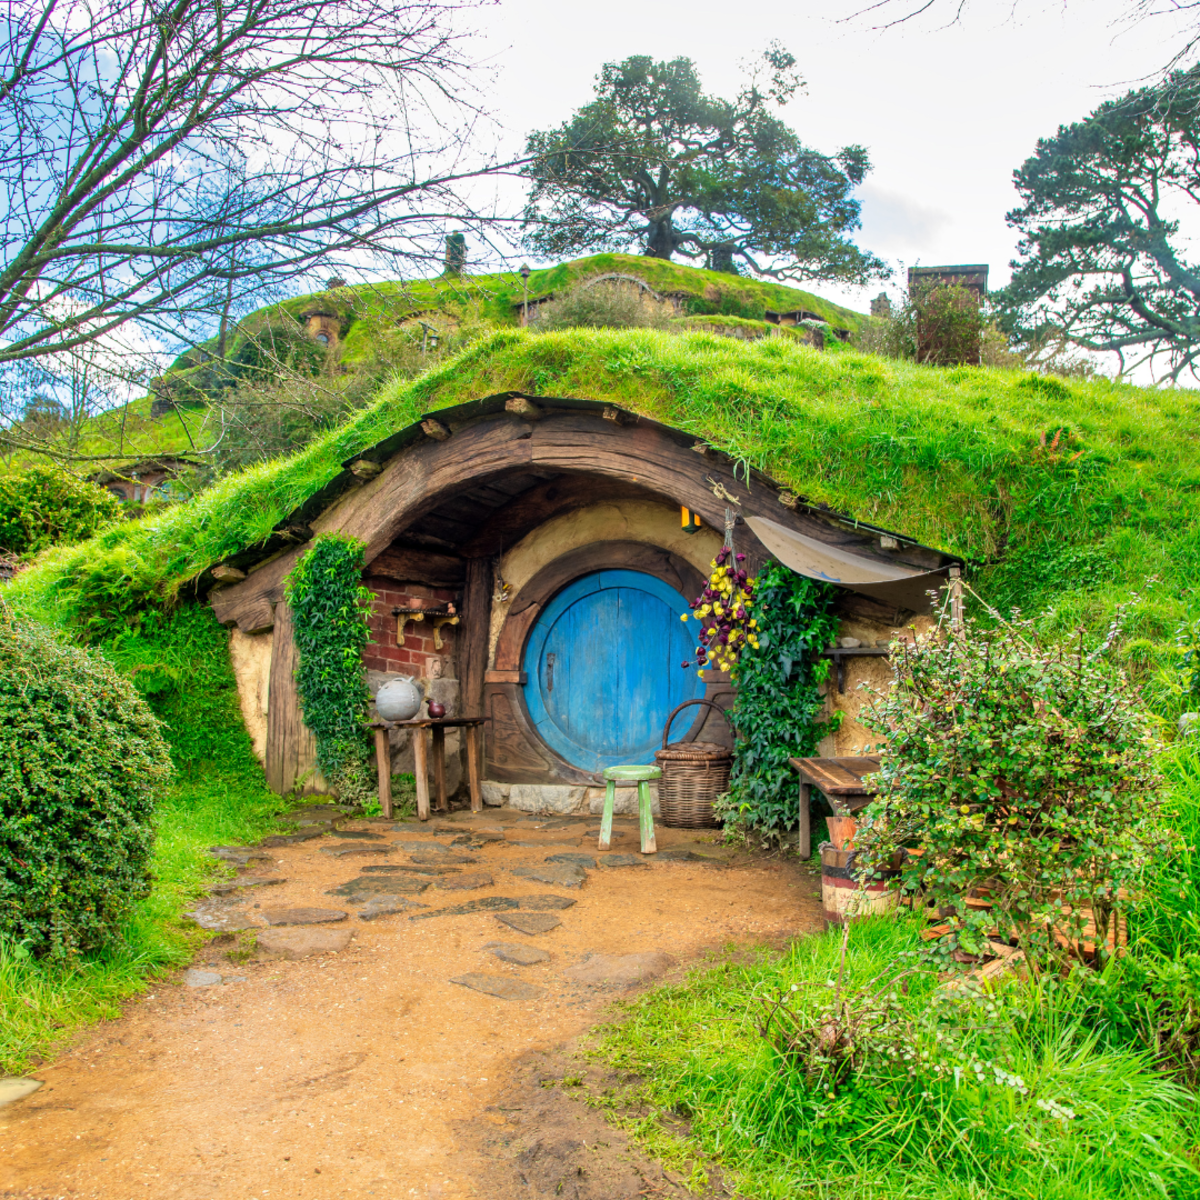 Learn all about the different kids of Men, Elves, and Hobbits.